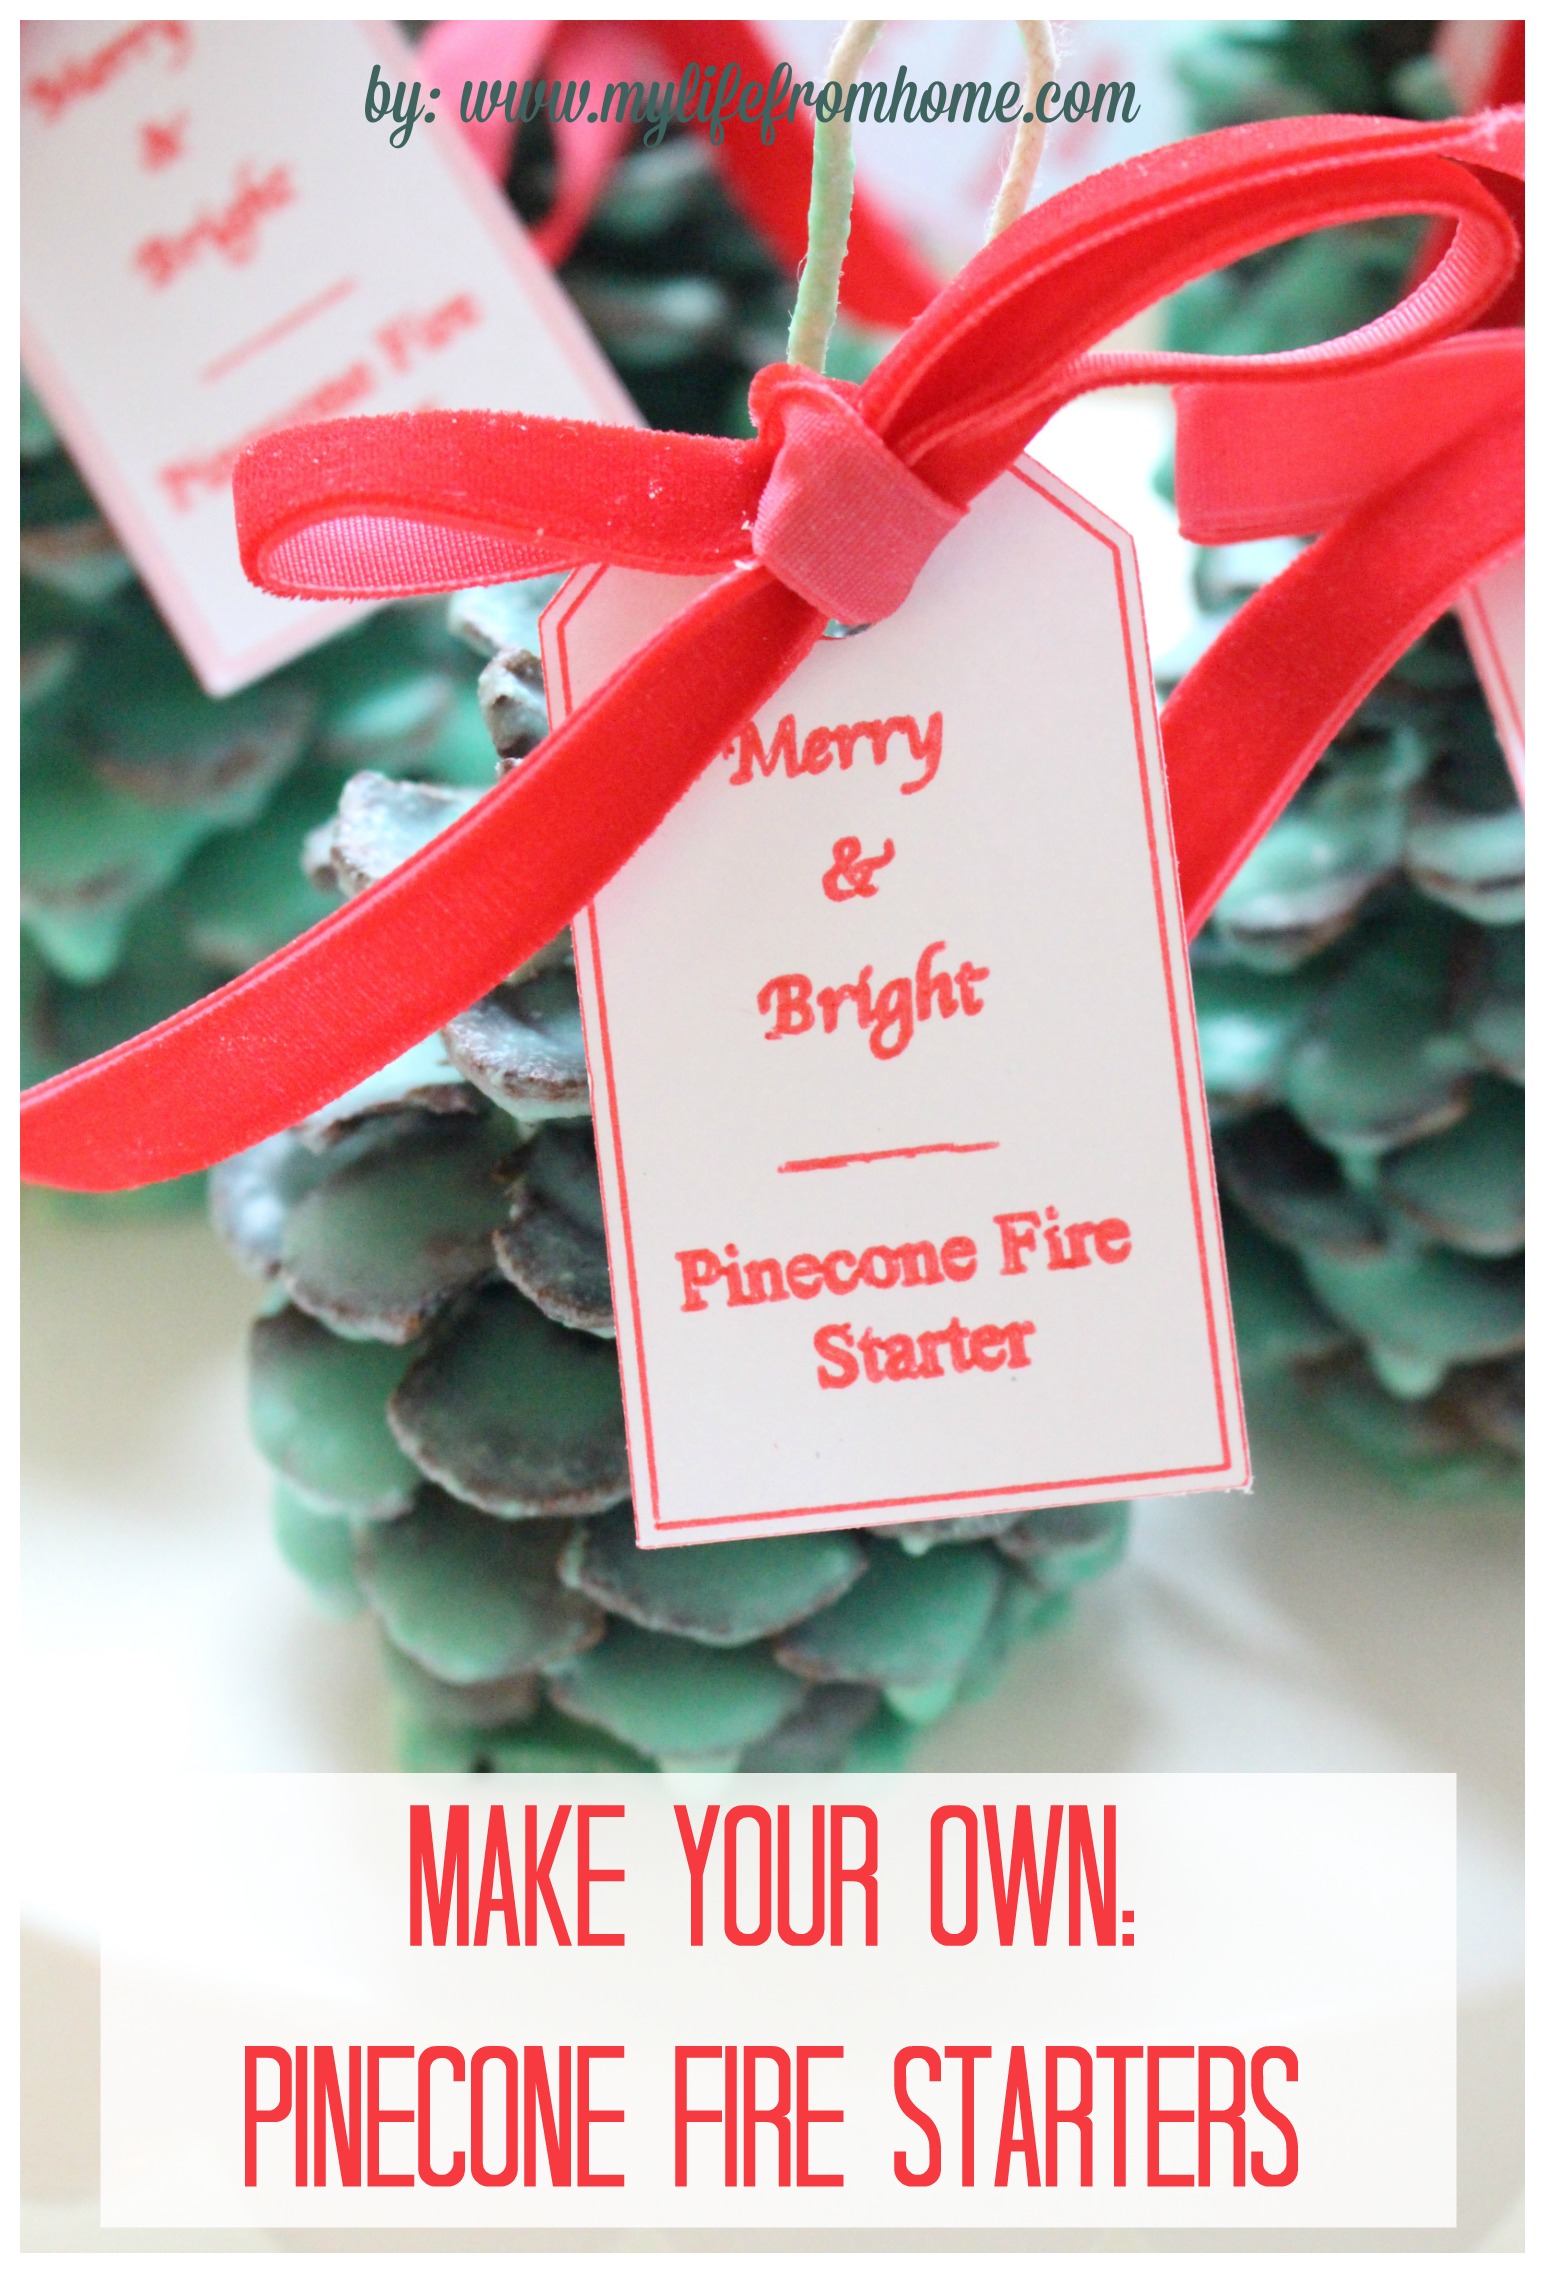 make-your-own-pinecone-fire-starters-diy-fire-starters-pinecones-crafts-with-pinecones-christmas-gifts-merry-bright-fire-starter-candle-wax-projects